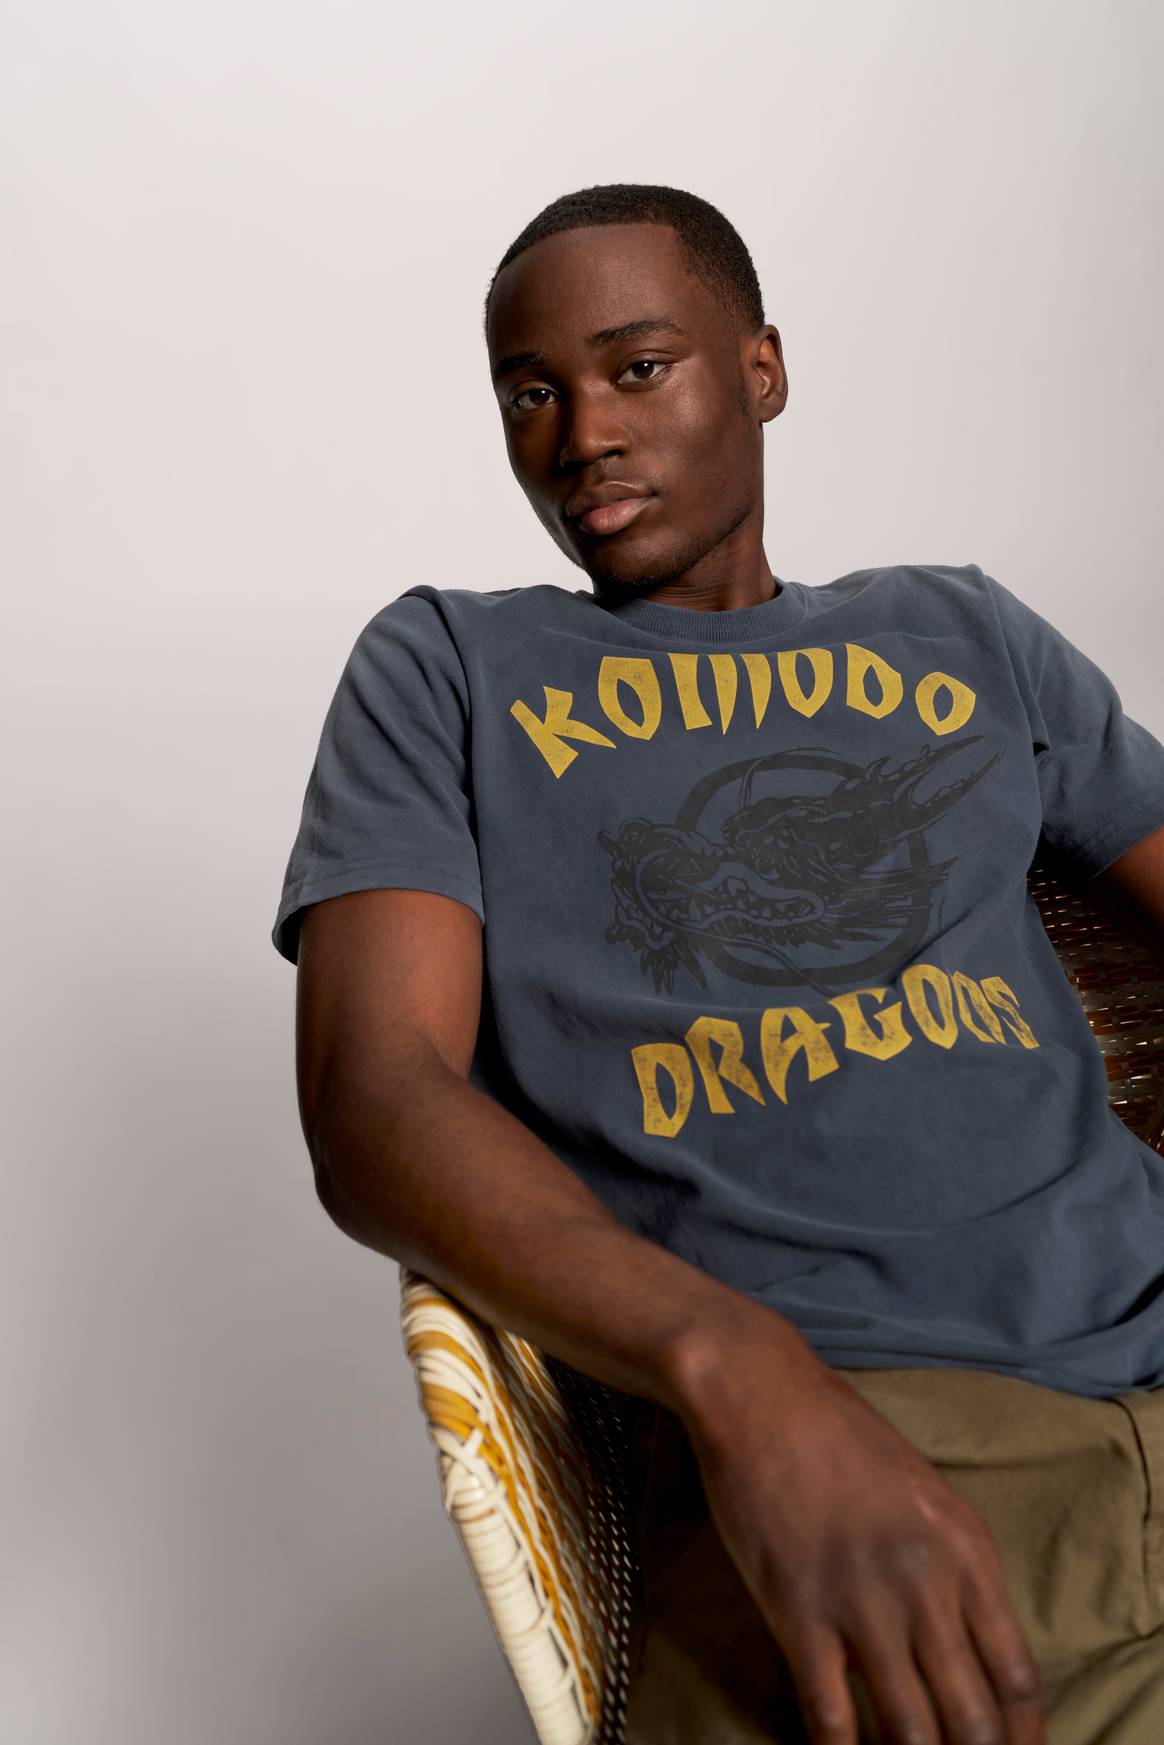 Picture: Komodo X Superdry, courtesy of the brand.